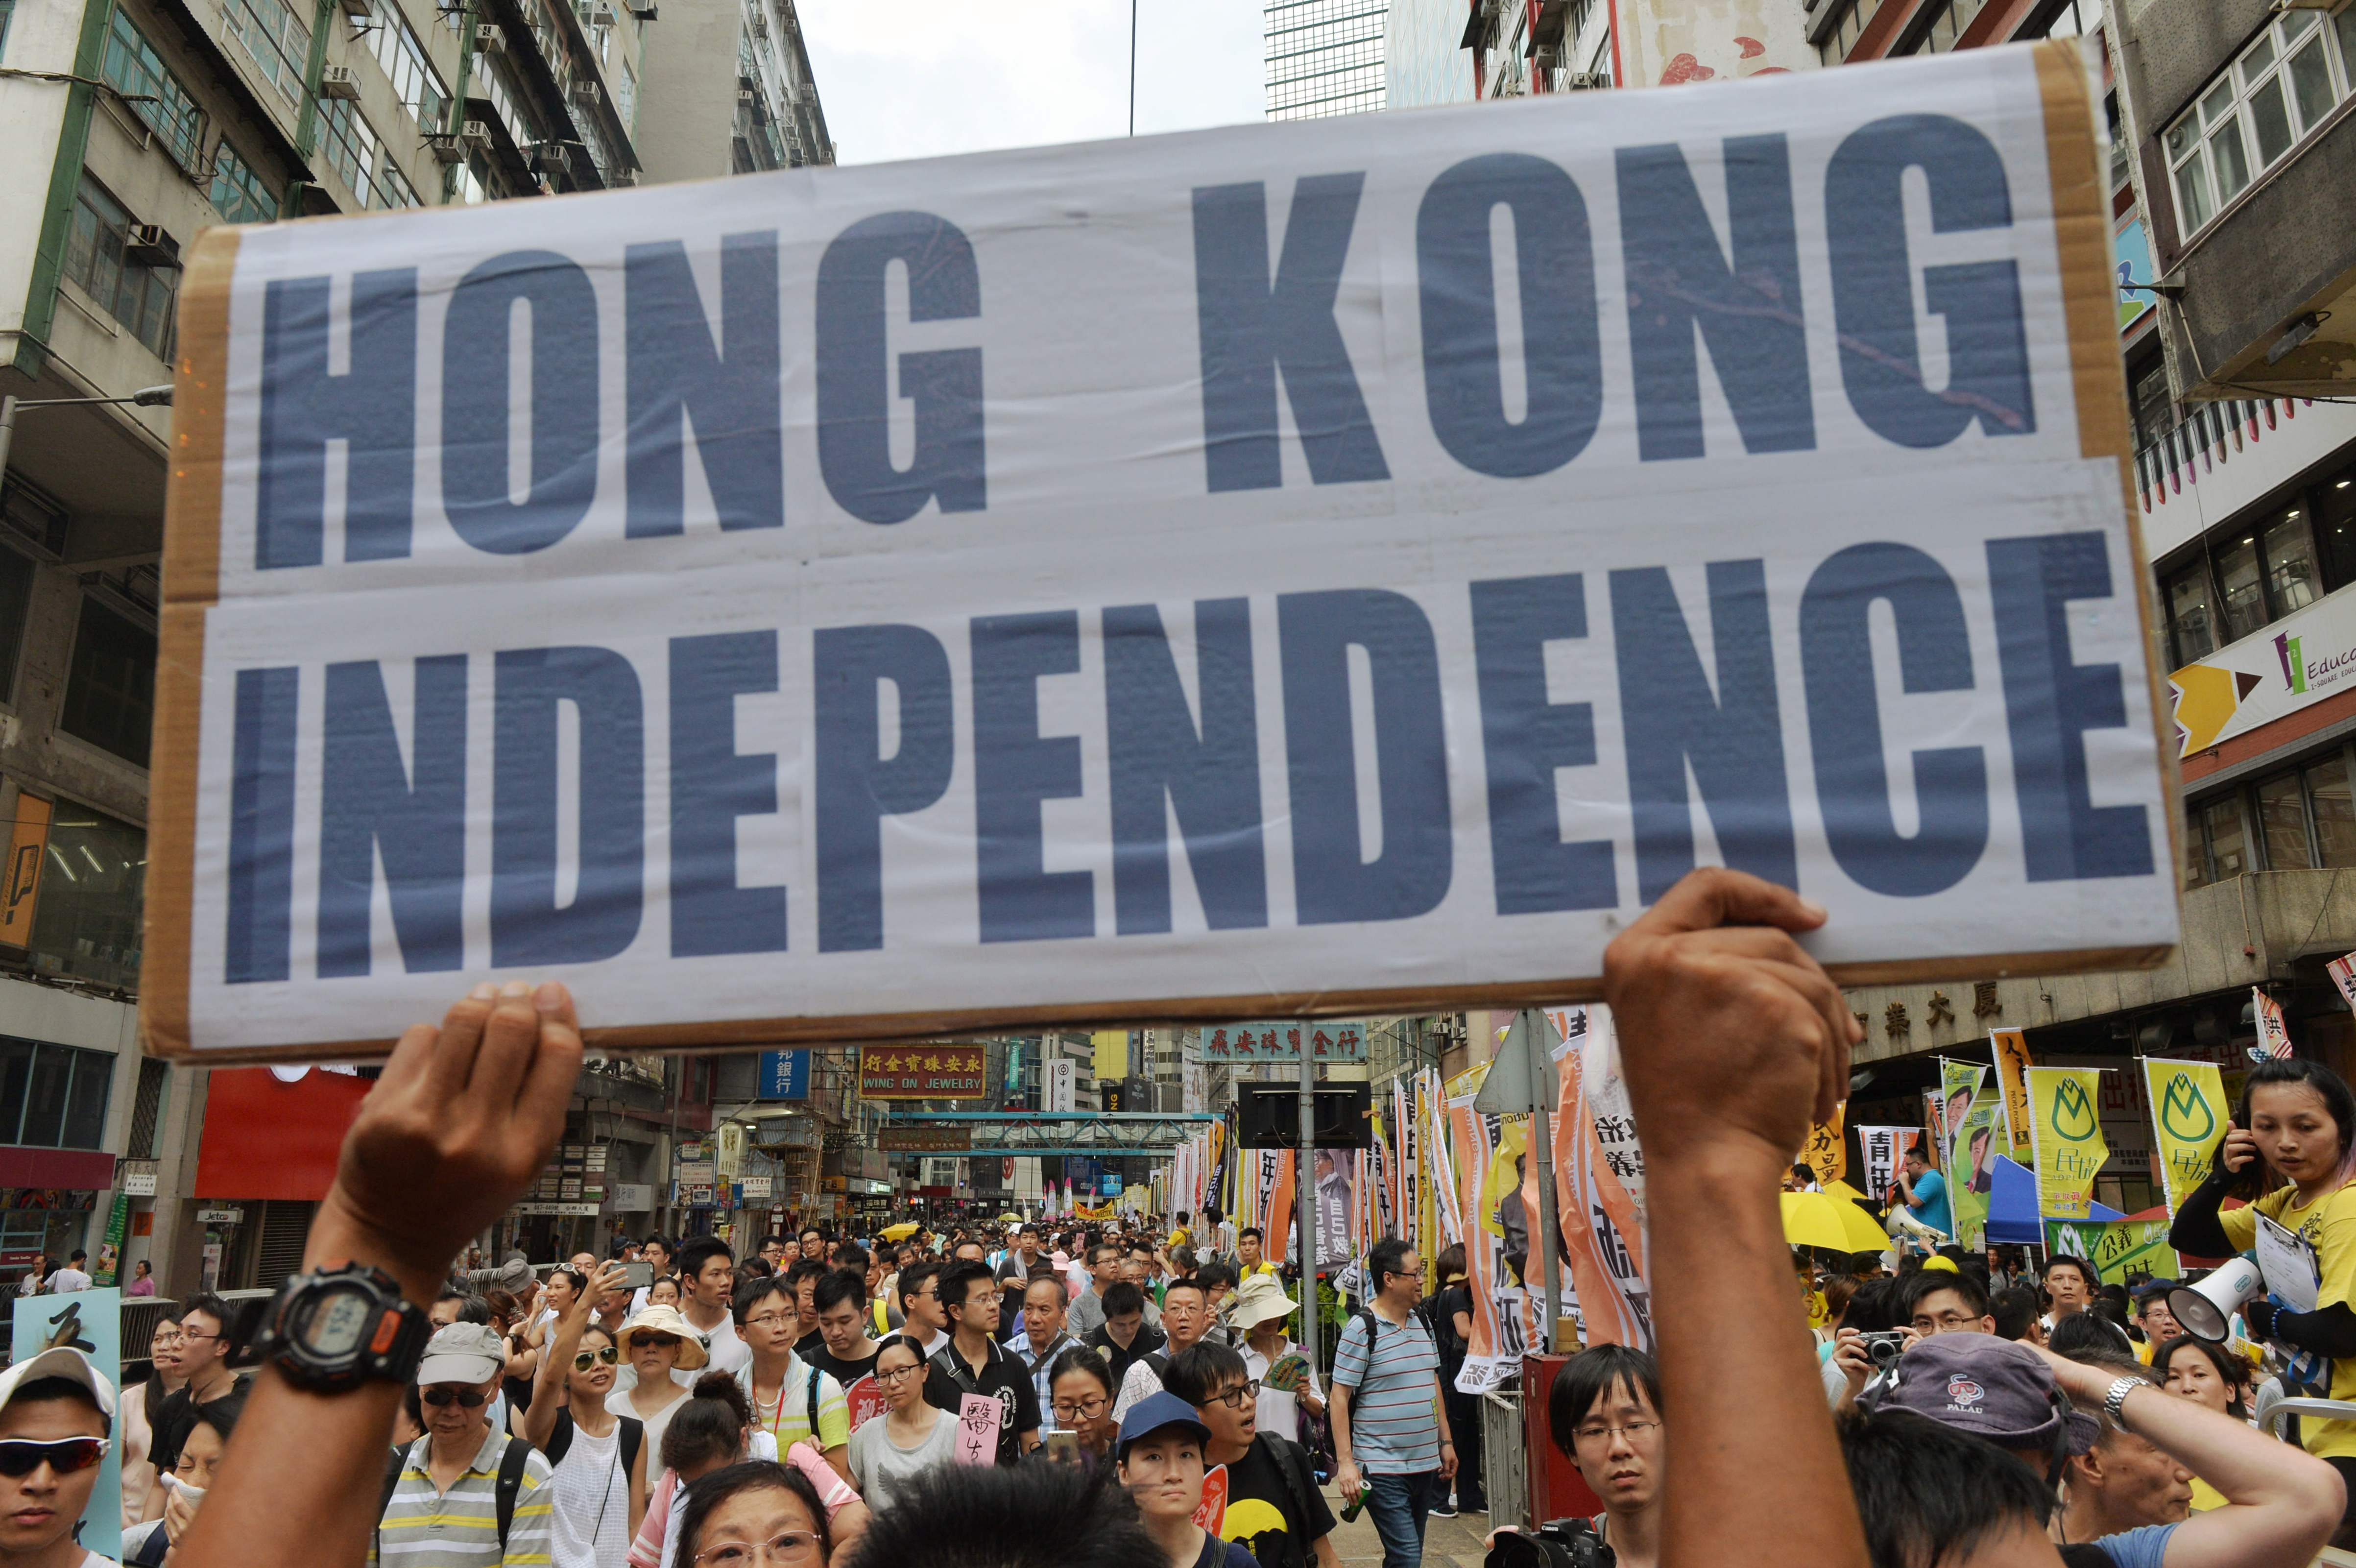 Tens of thousands protest in Hong Kong as China tensions simmer over booksellers